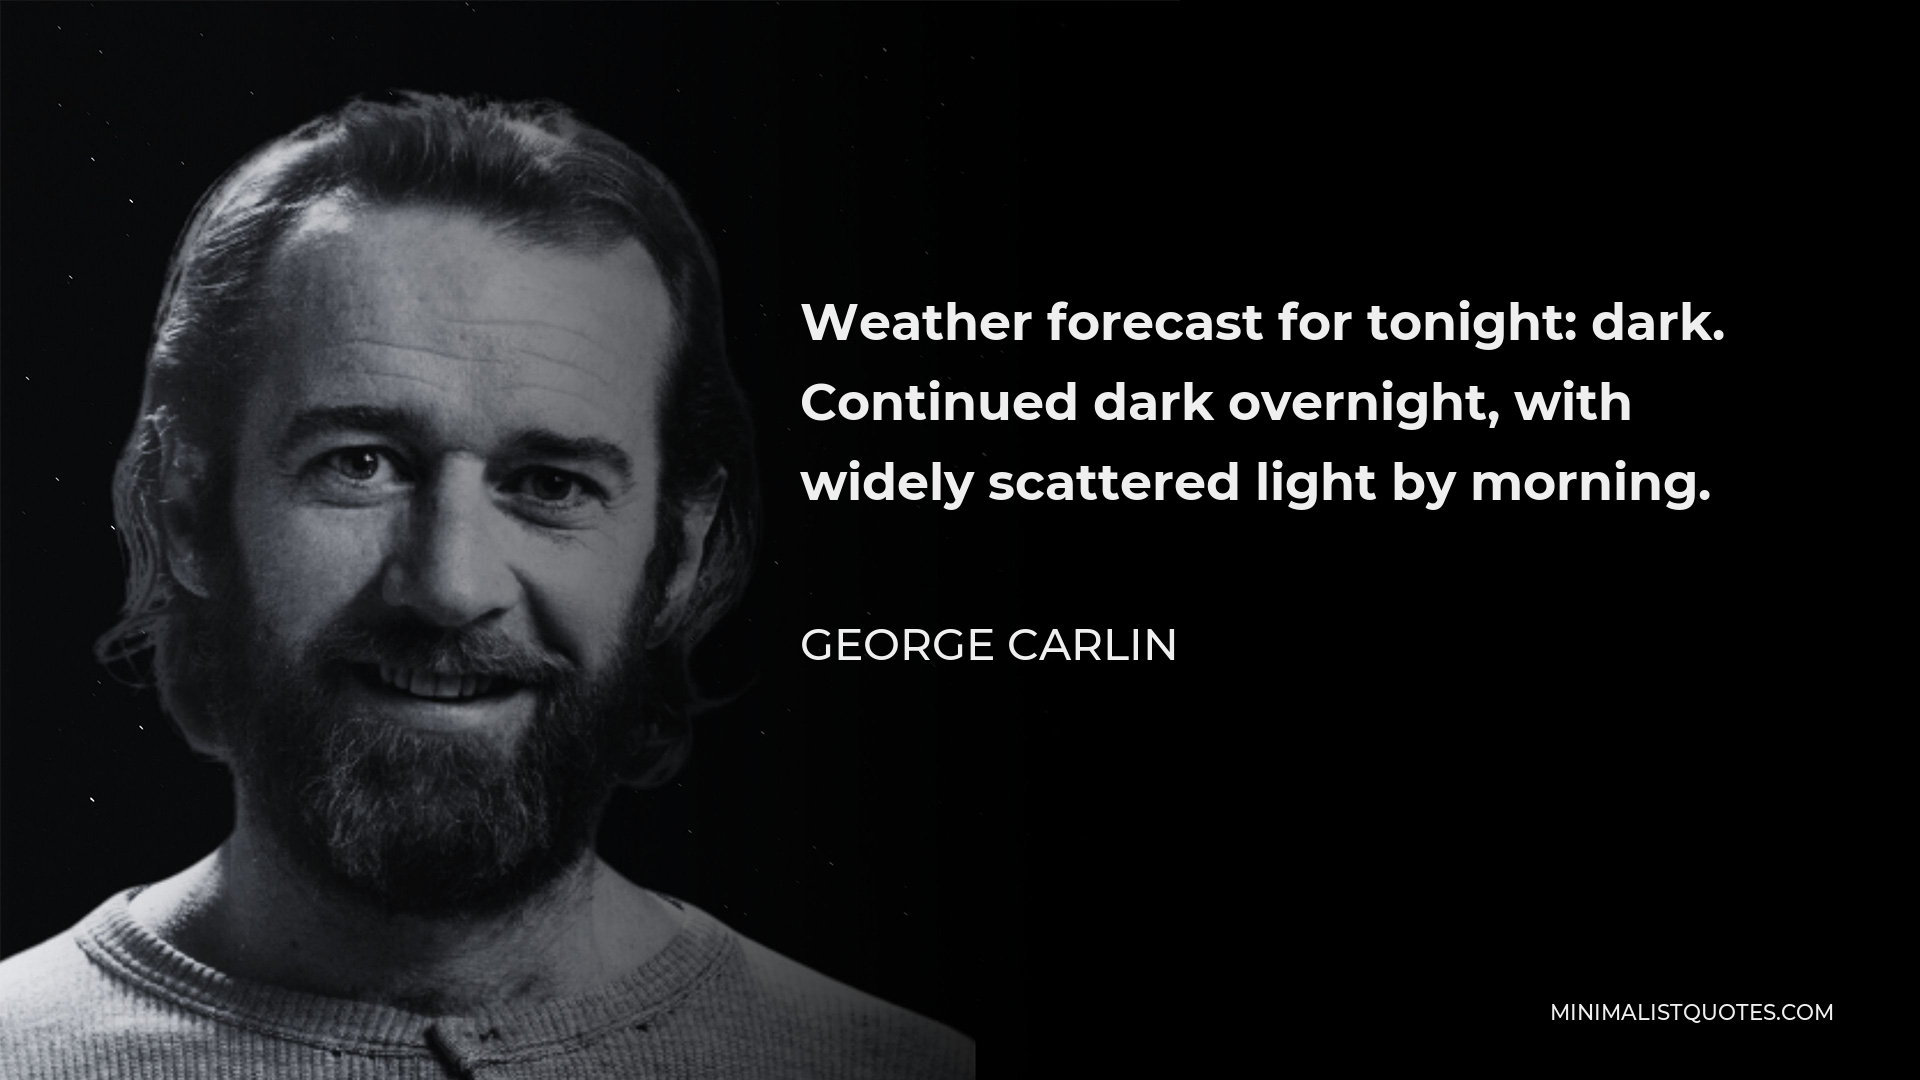 George Carlin Quote - Weather forecast for tonight: dark. Continued dark overnight, with widely scattered light by morning.